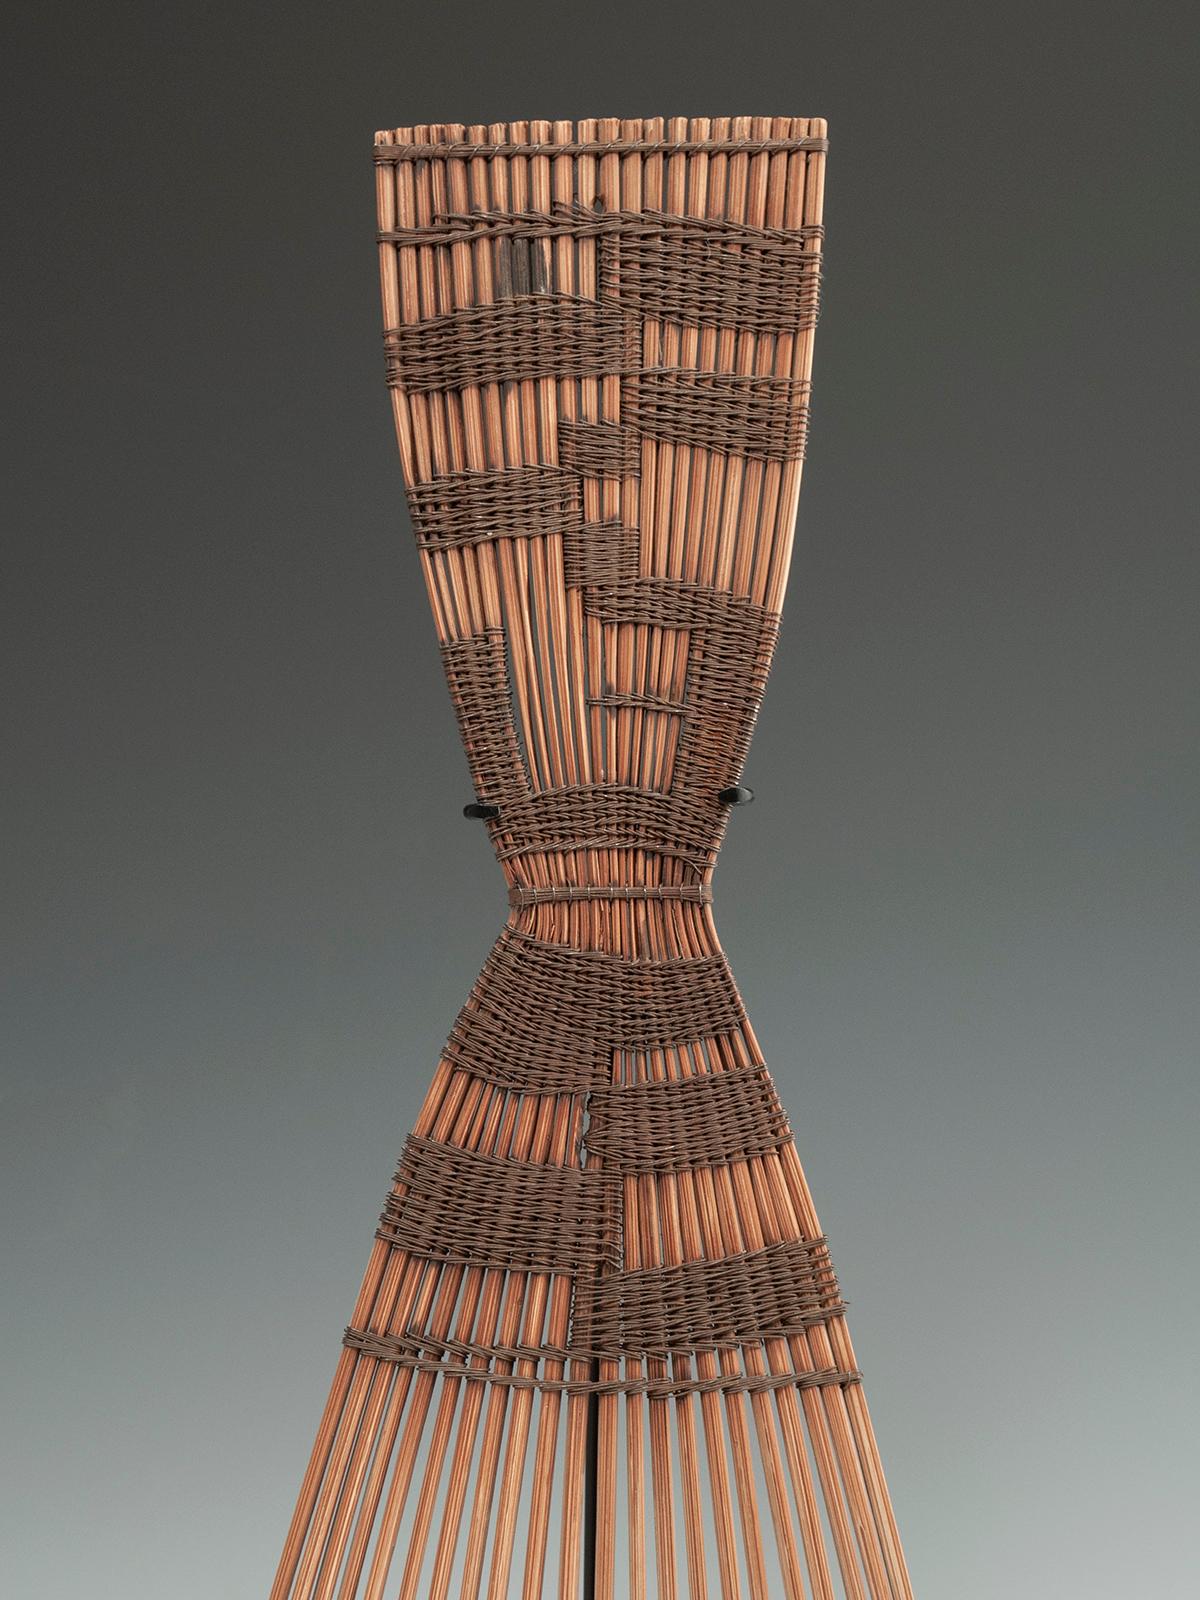 Congolese Mid-20th Century Ceremonial Comb, Luba People, Zaire, D. R. Congo For Sale